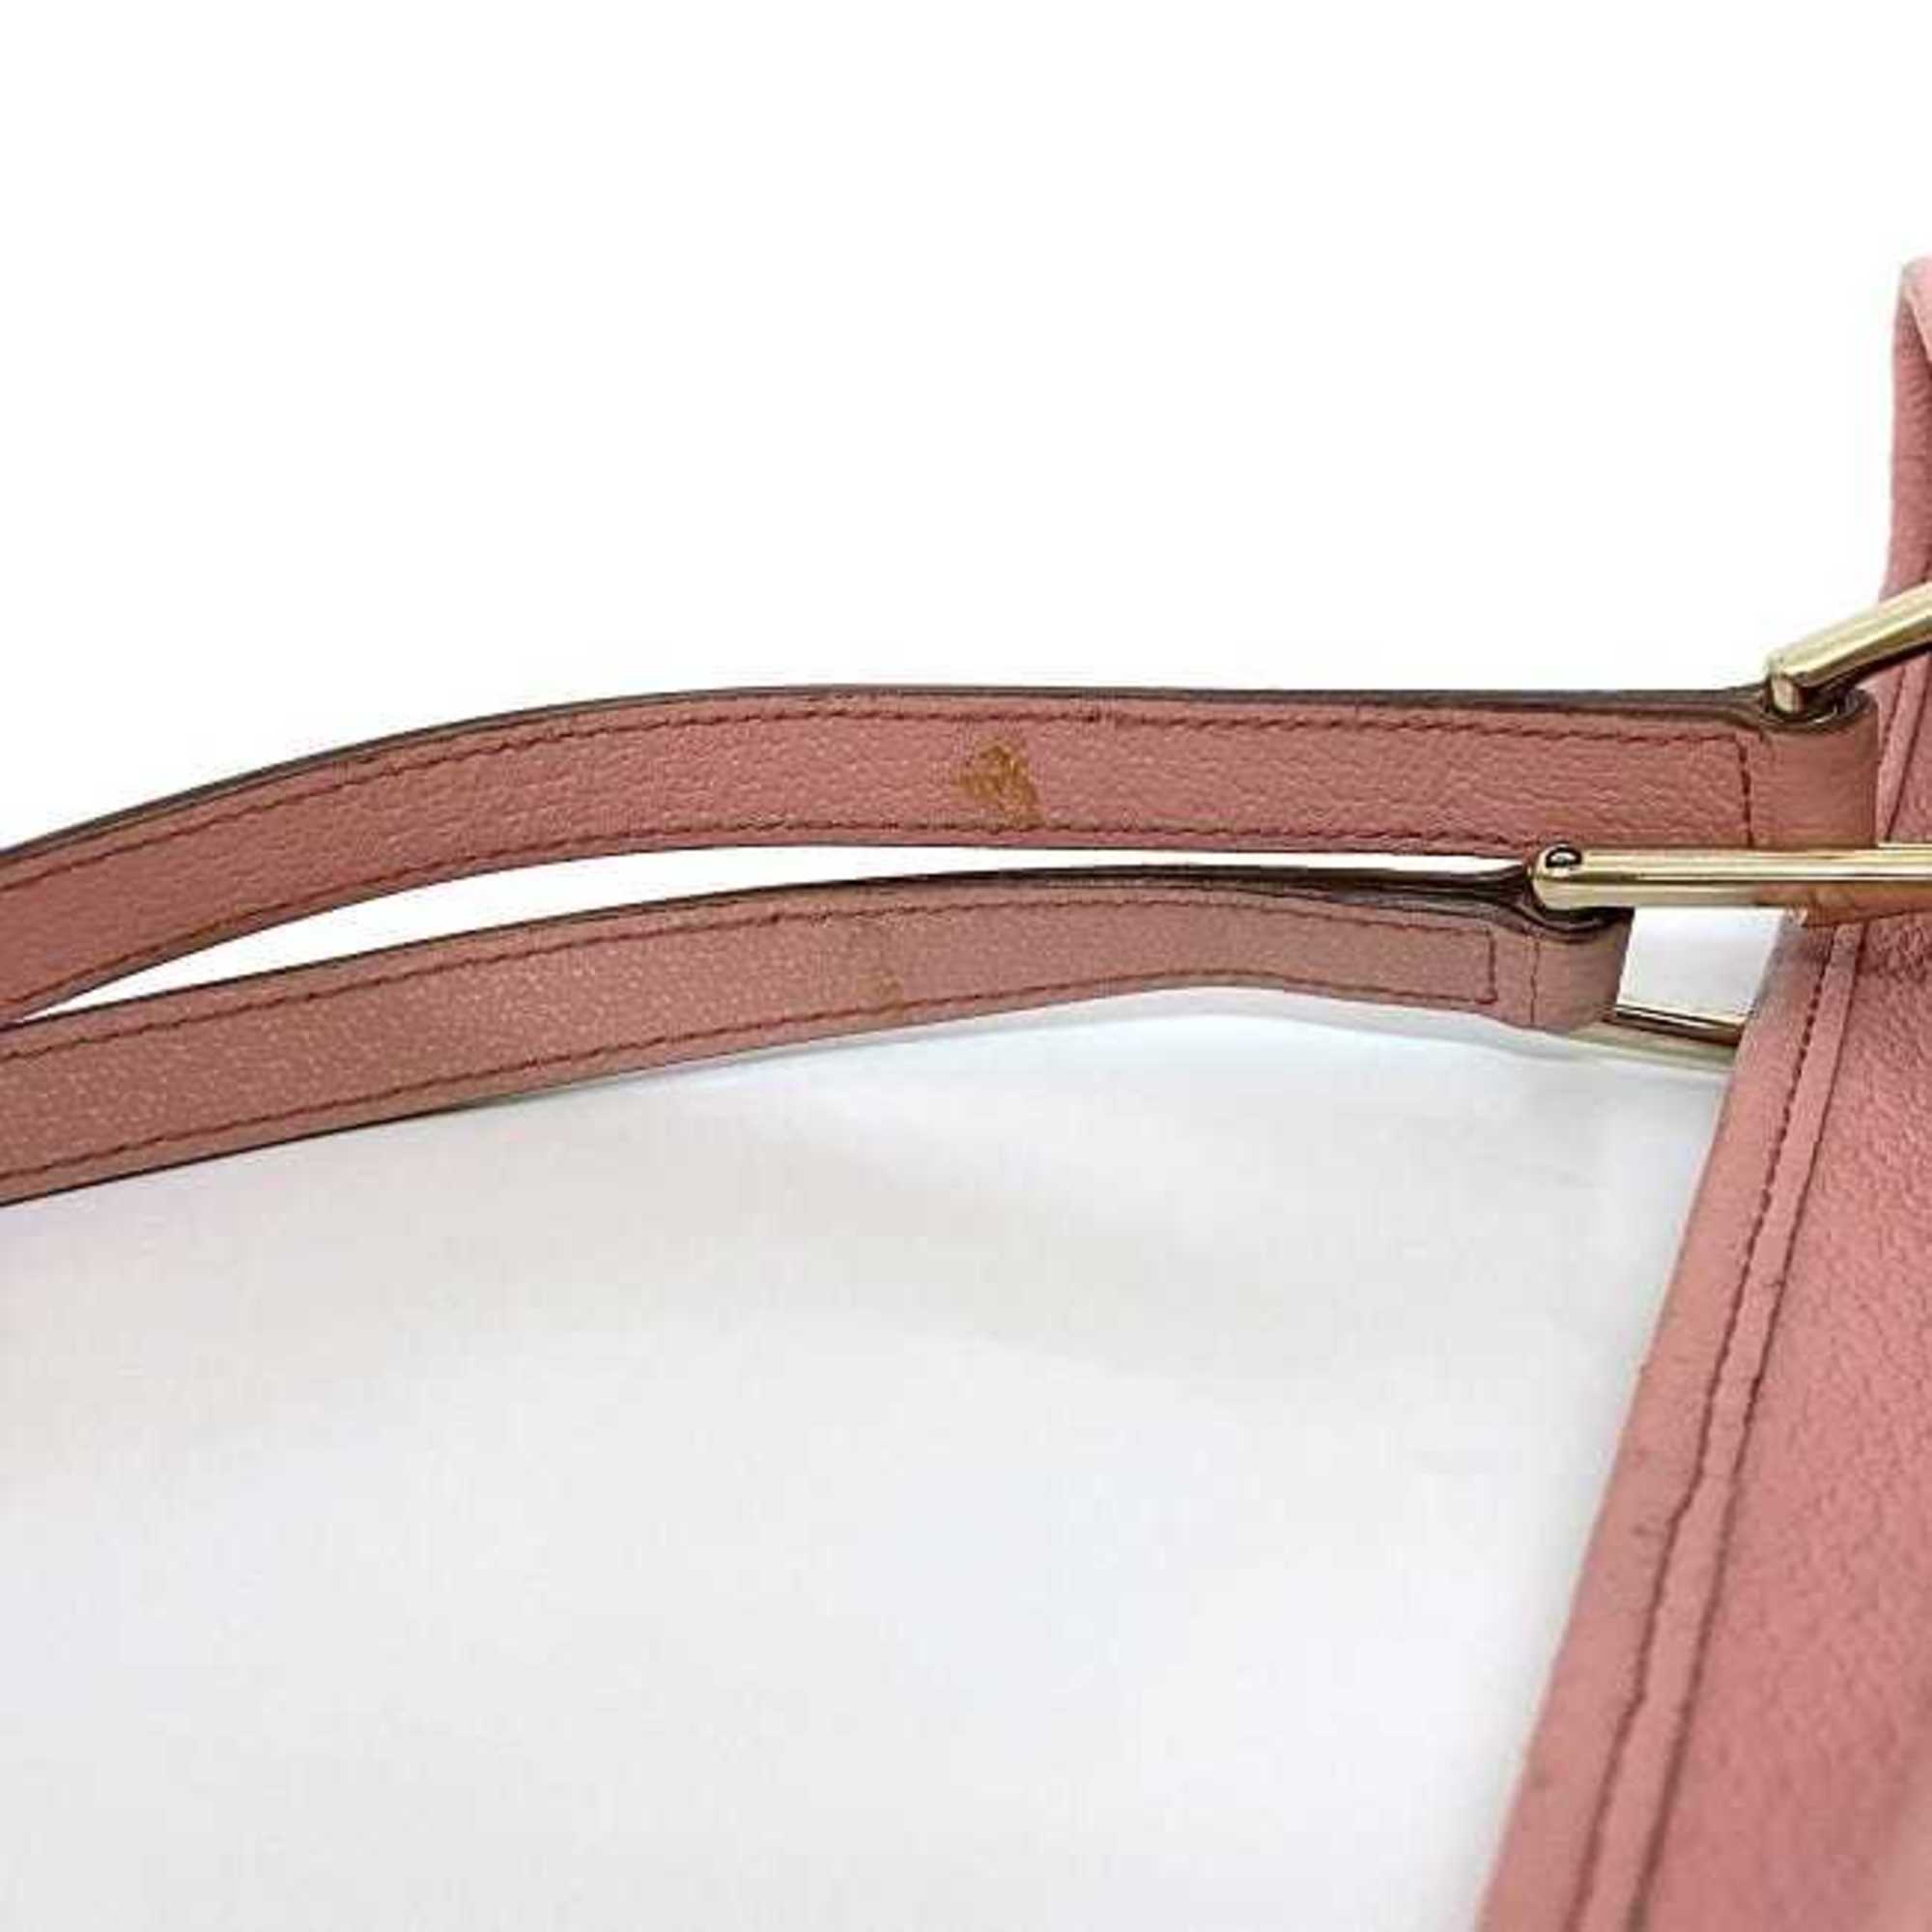 Gucci tote bag beige pink 120836 GG canvas leather GUCCI ladies